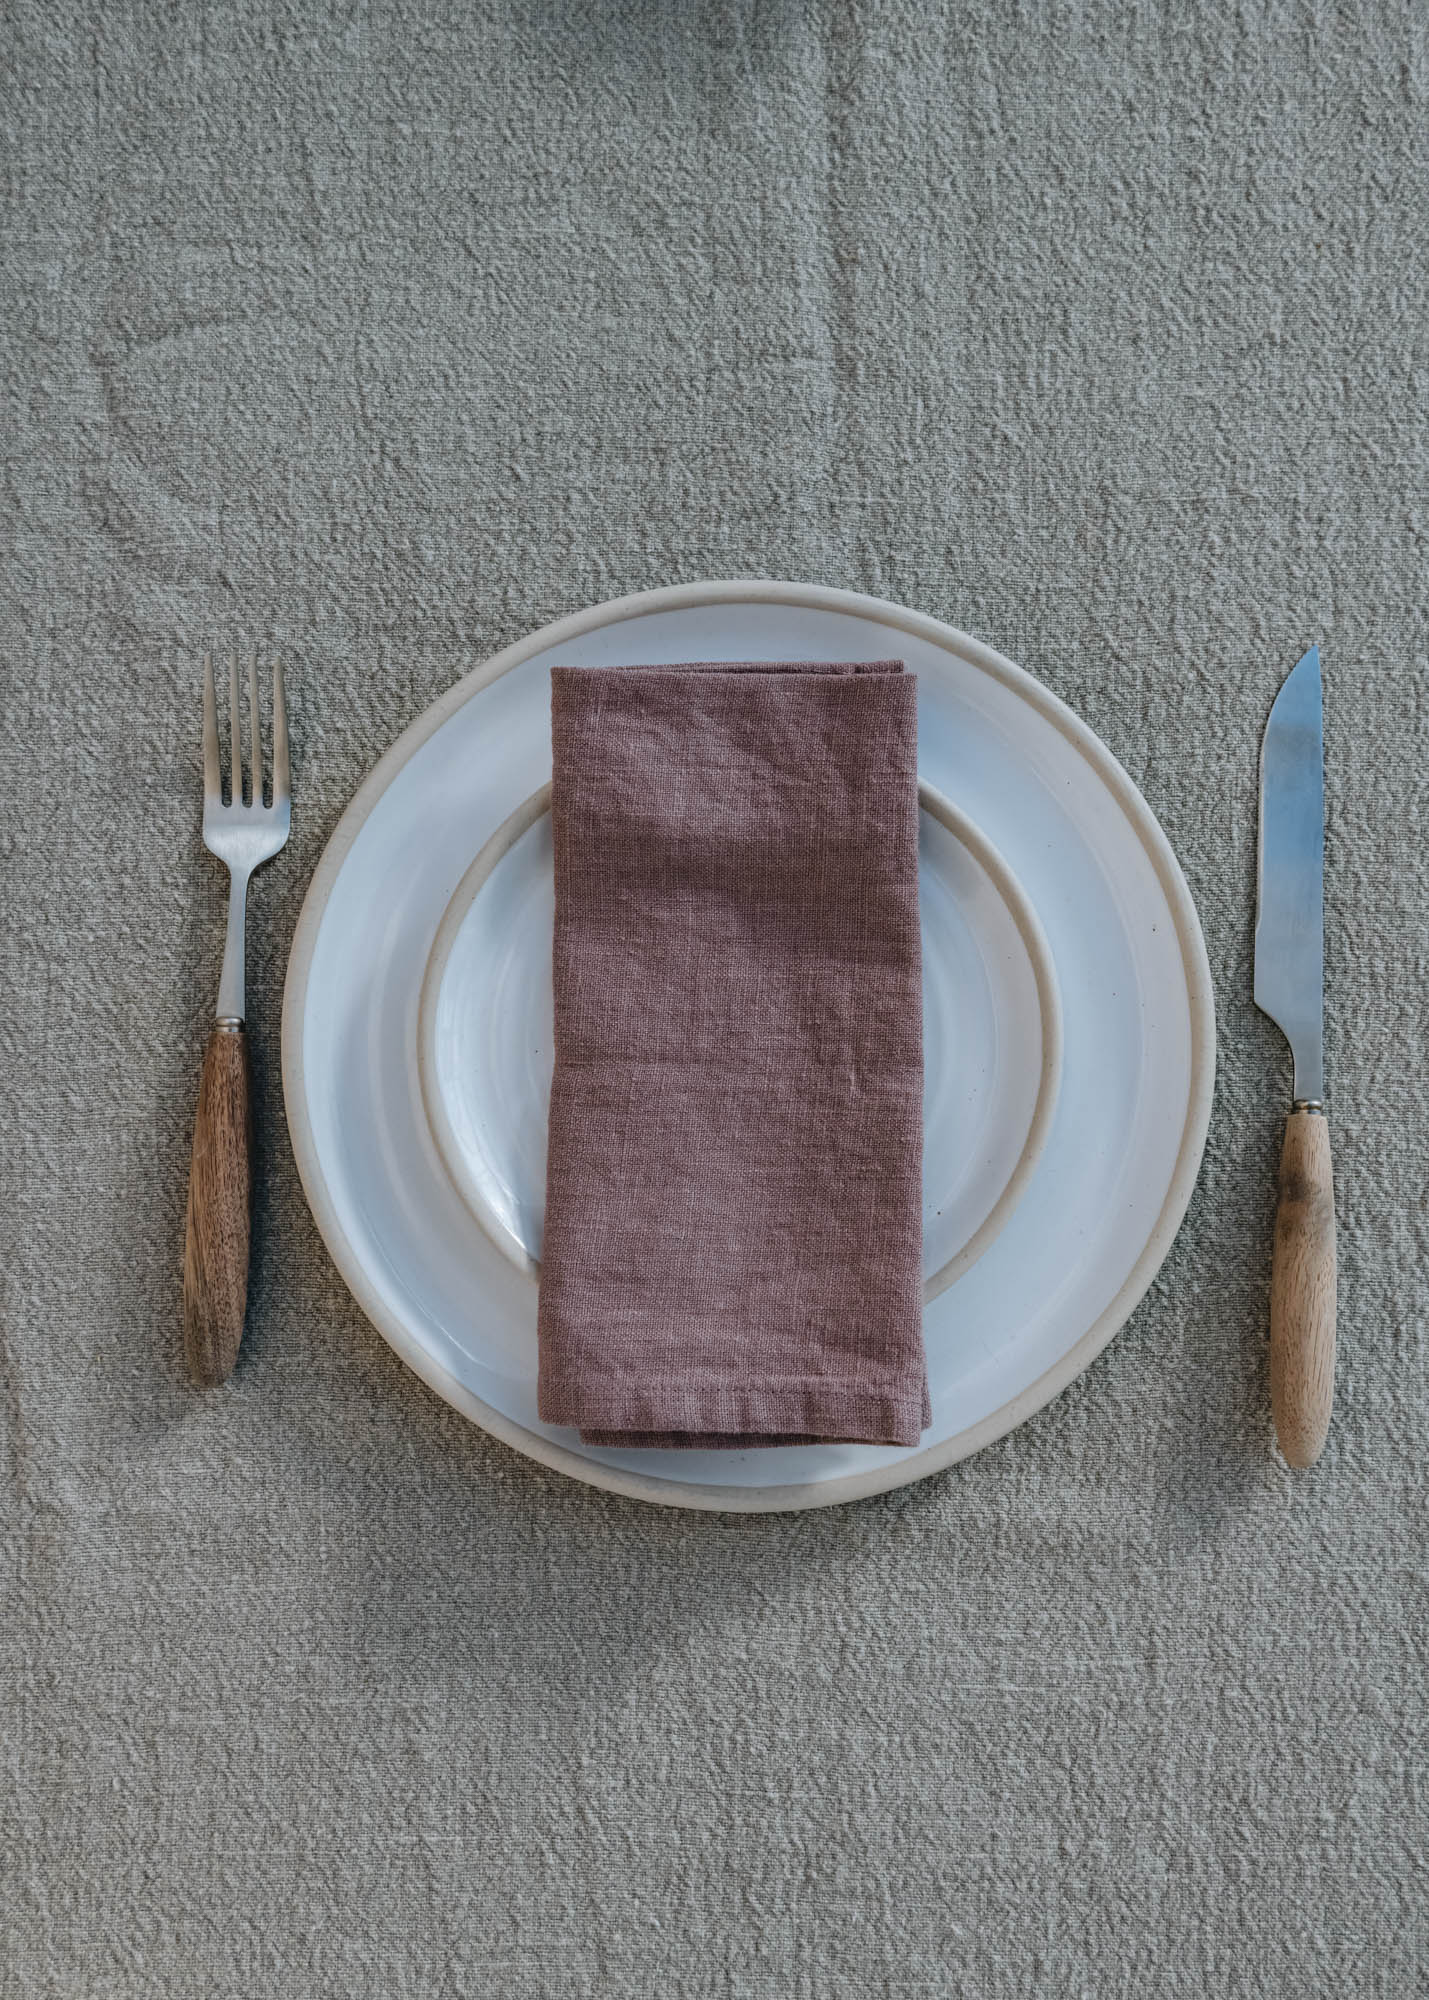 Ashes of Roses Linen Napkins, pack of two